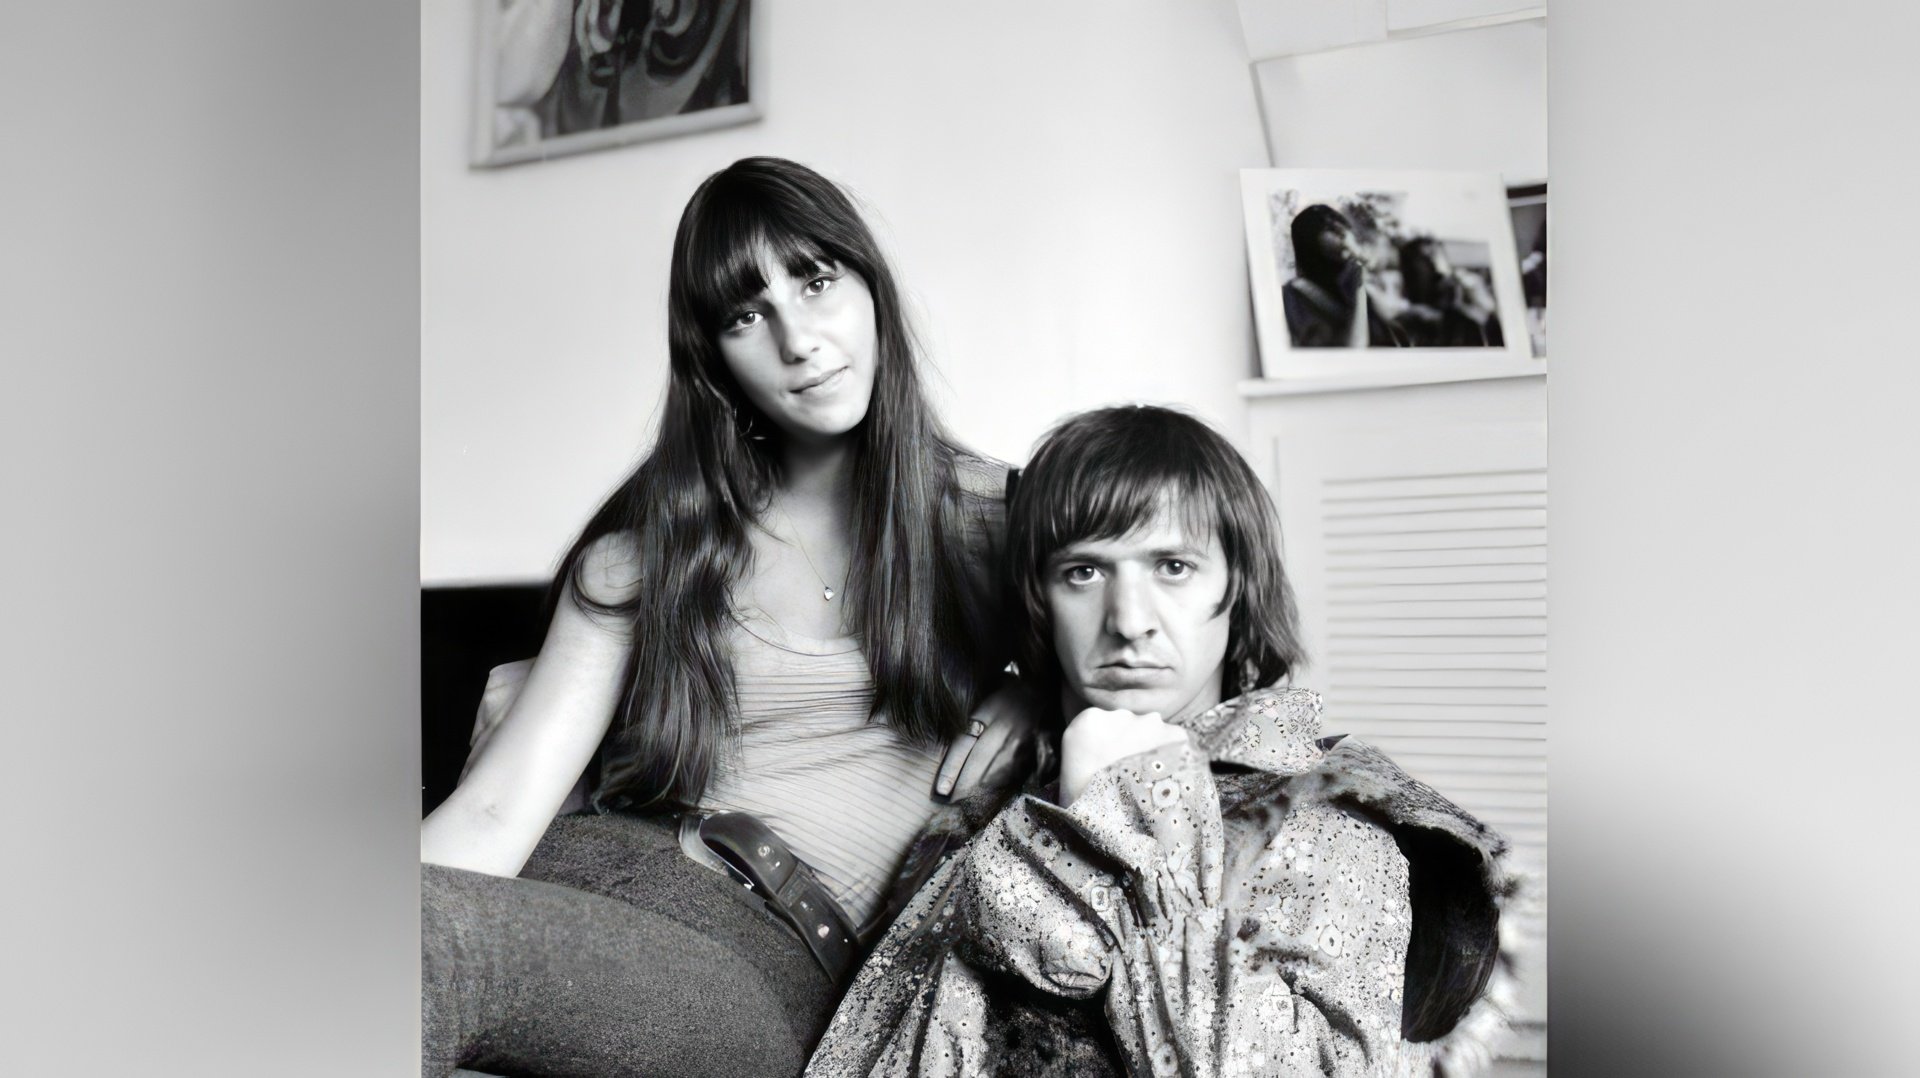 Cher and Sonny Bono in their youth